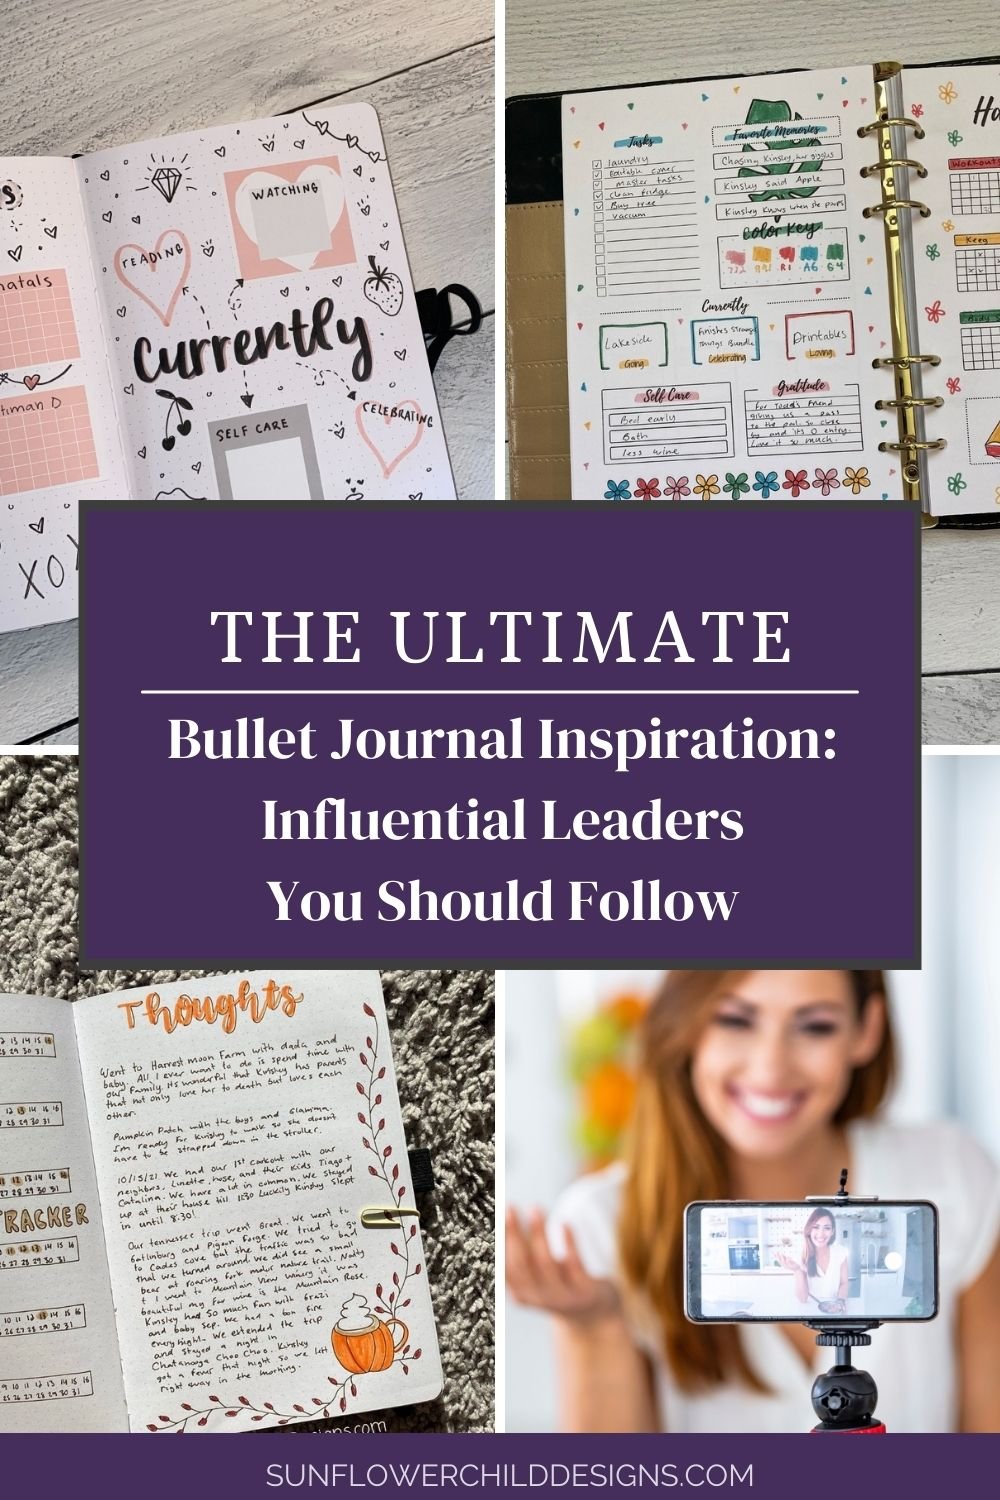 Discover Ultimate Bullet Journal Inspiration: Top Influential Leaders to Follow!